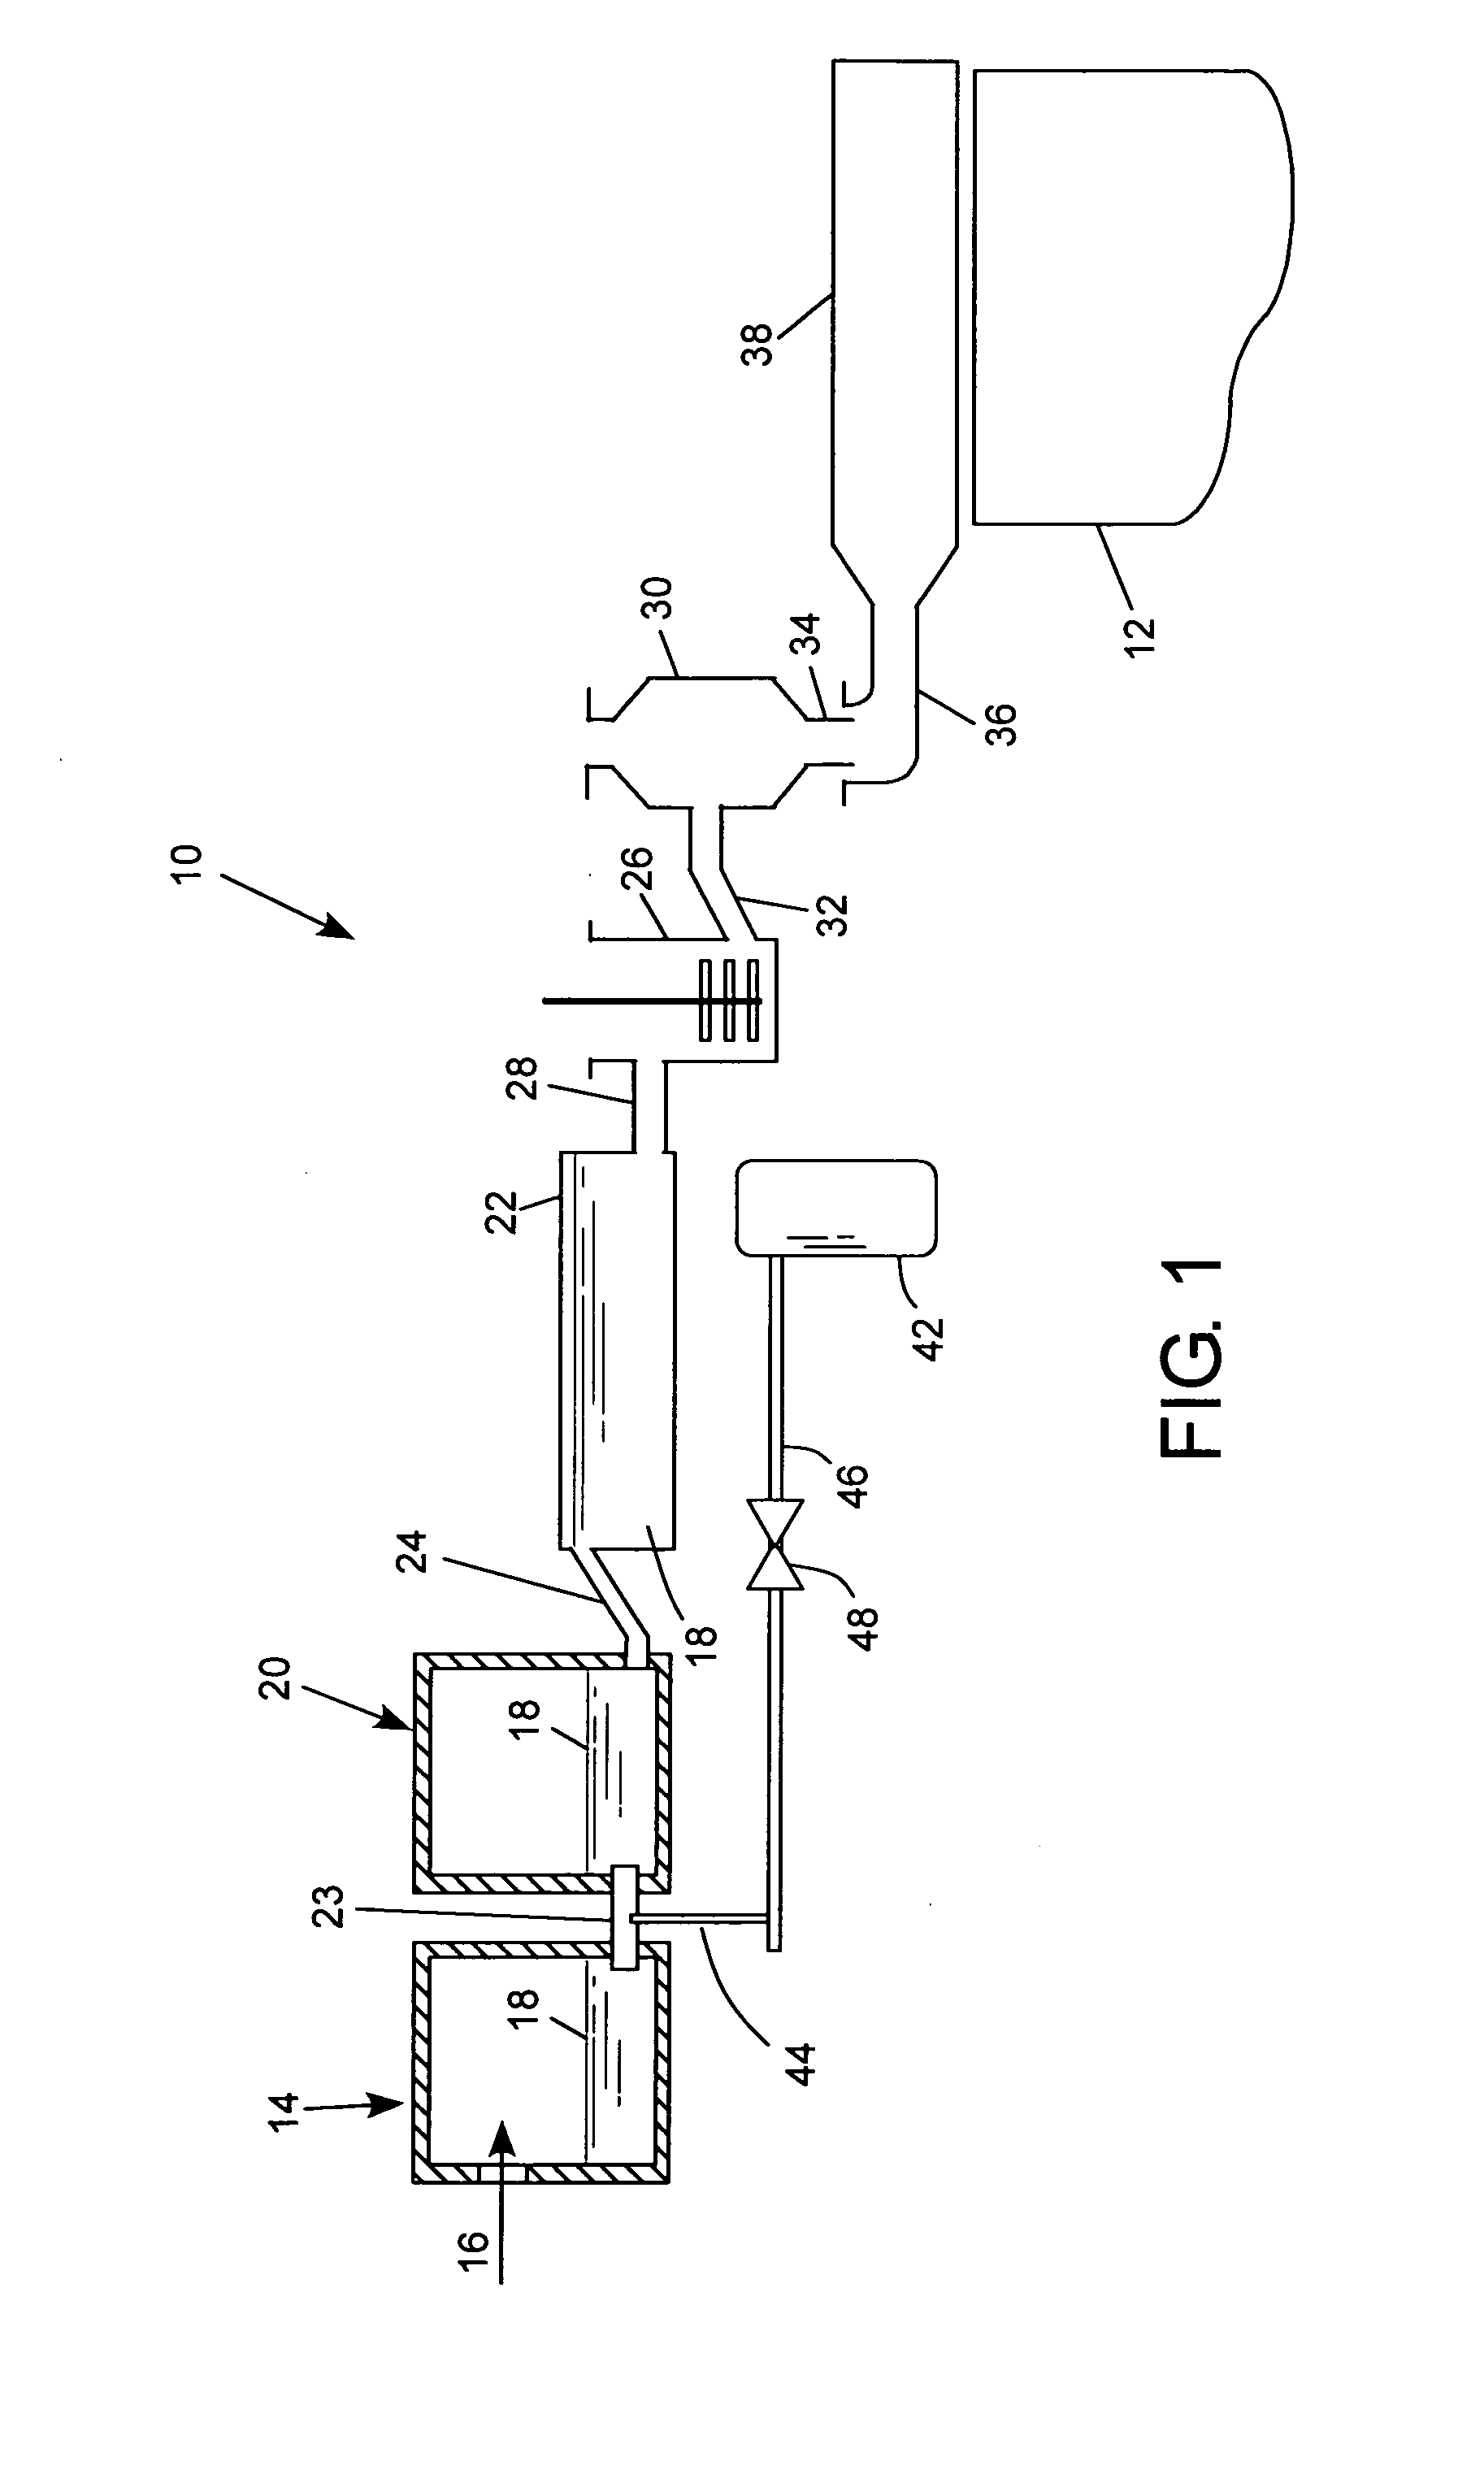 Method of bubbling a gas into a glass melt